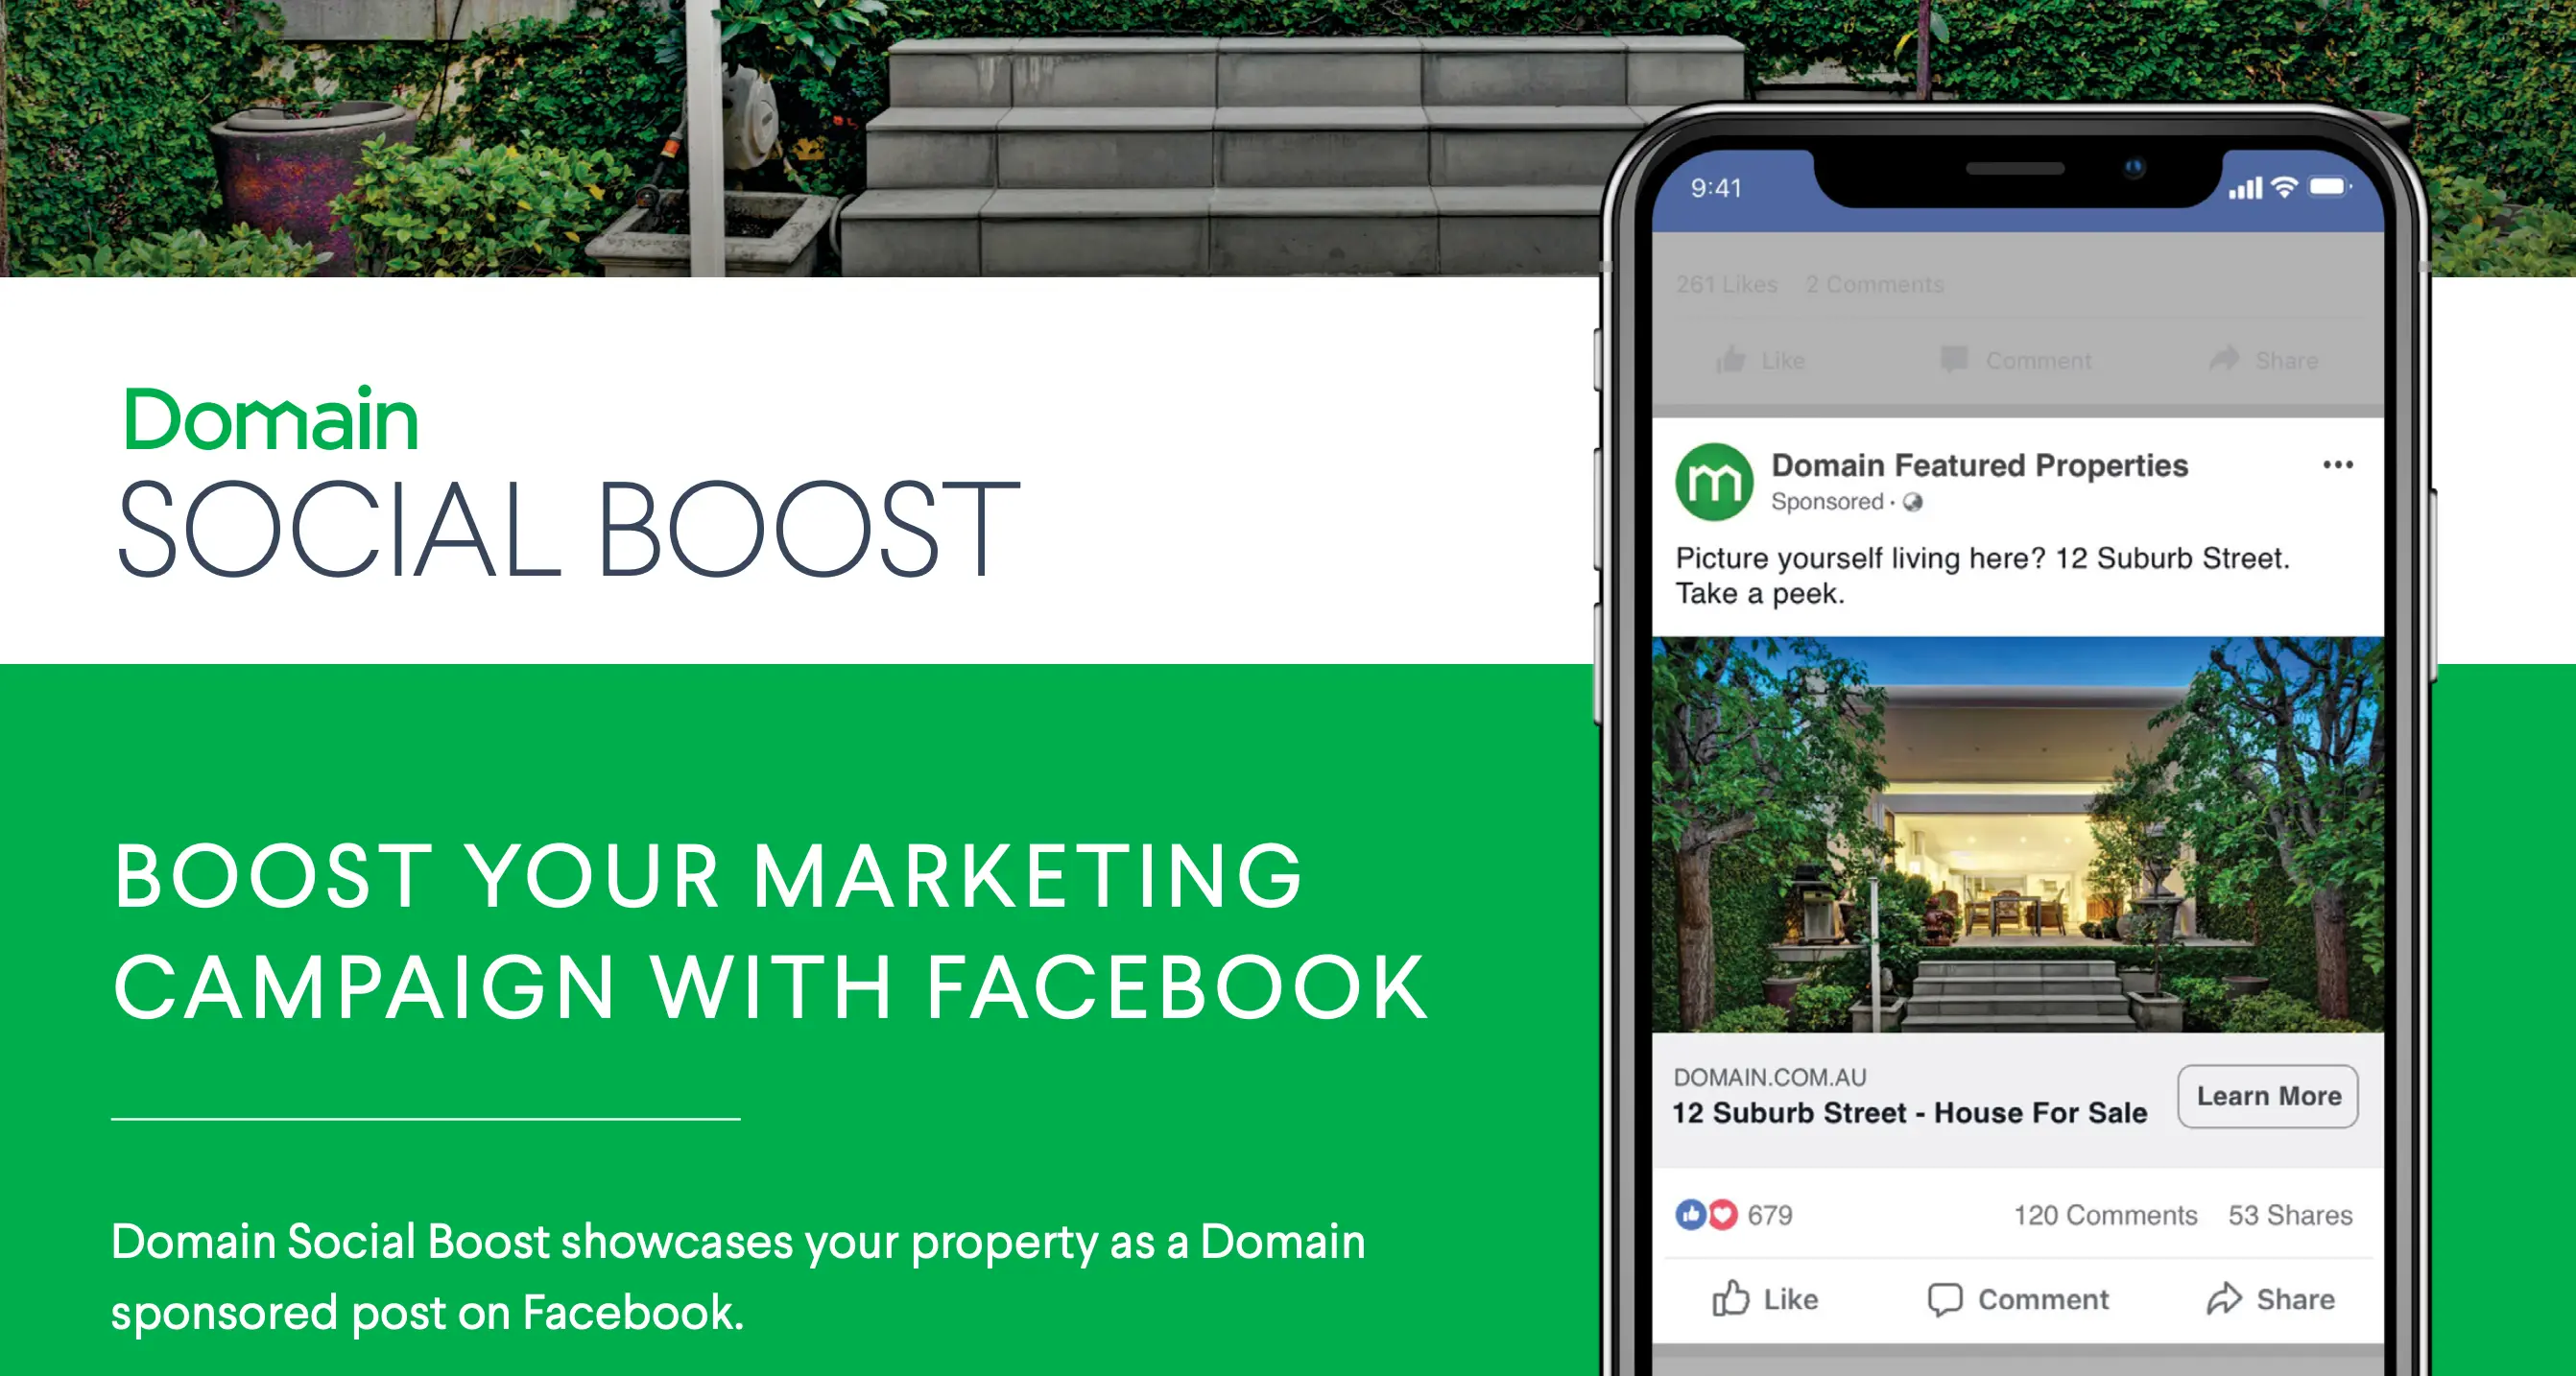 Domain Social Boost - boost your property marketing campaign with Facebook